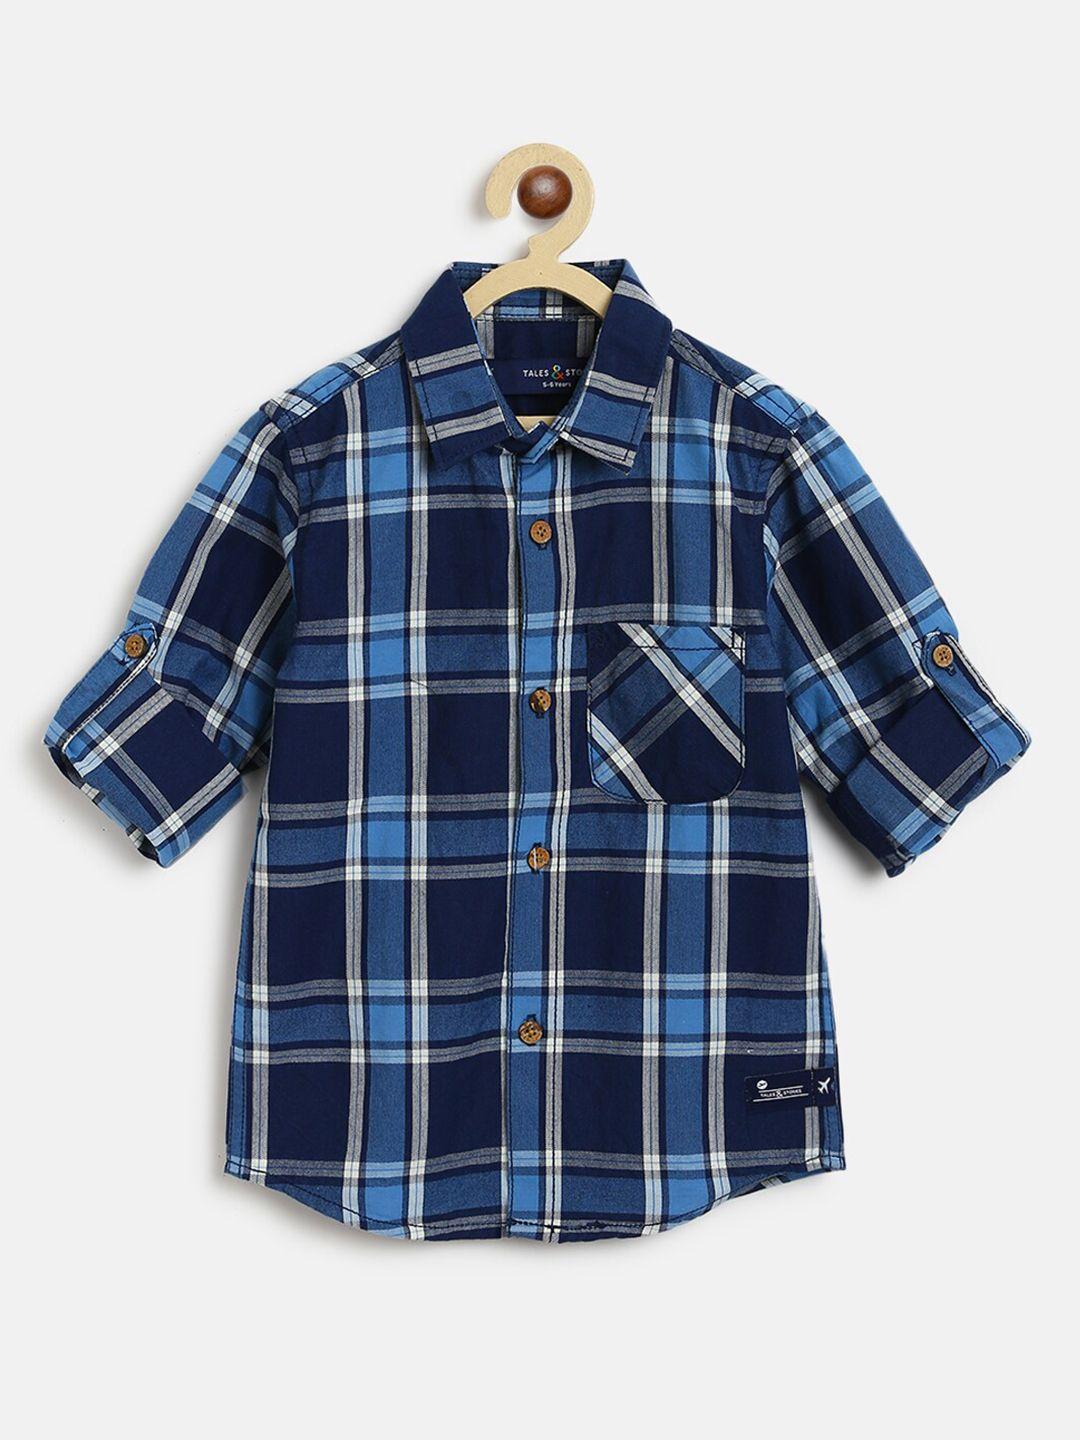 TALES & STORIES Boys Blue Checked Cotton Casual Shirt